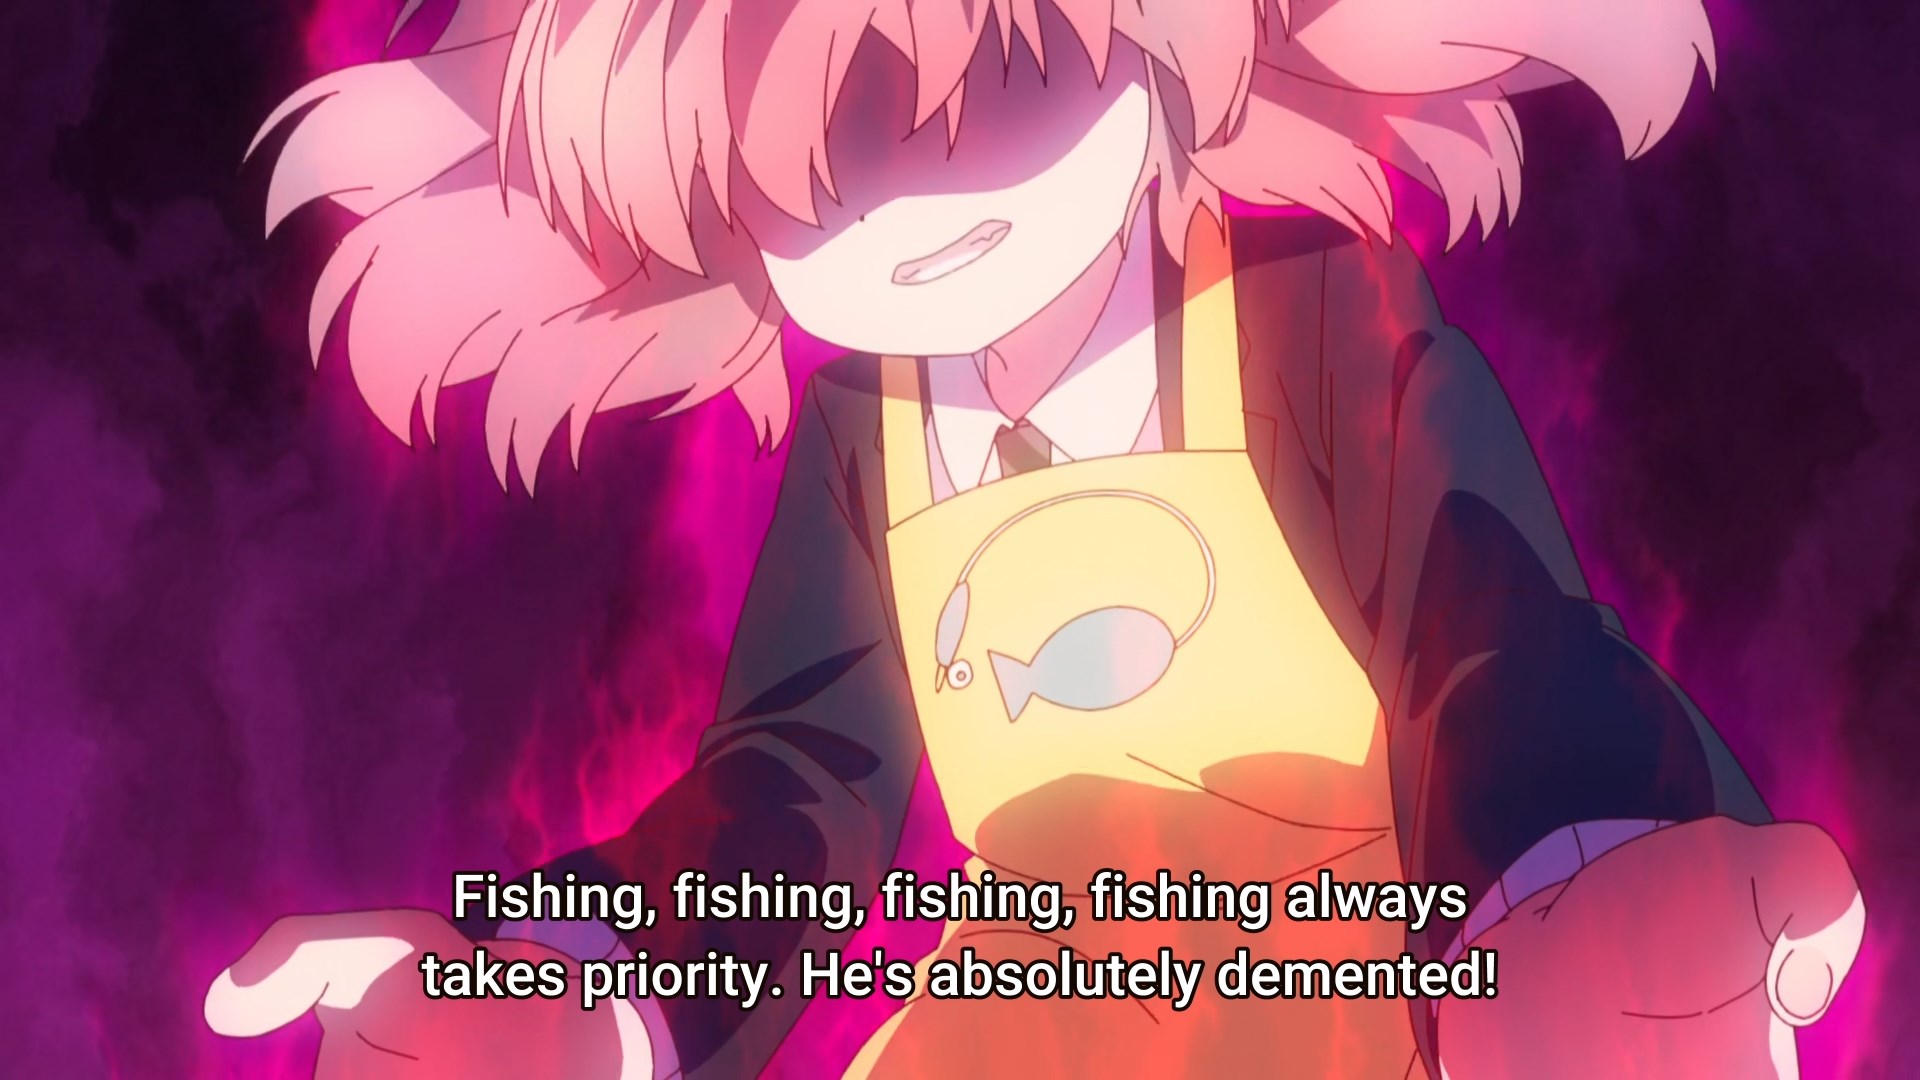 Koi on a rant about how her father only cares for fishing